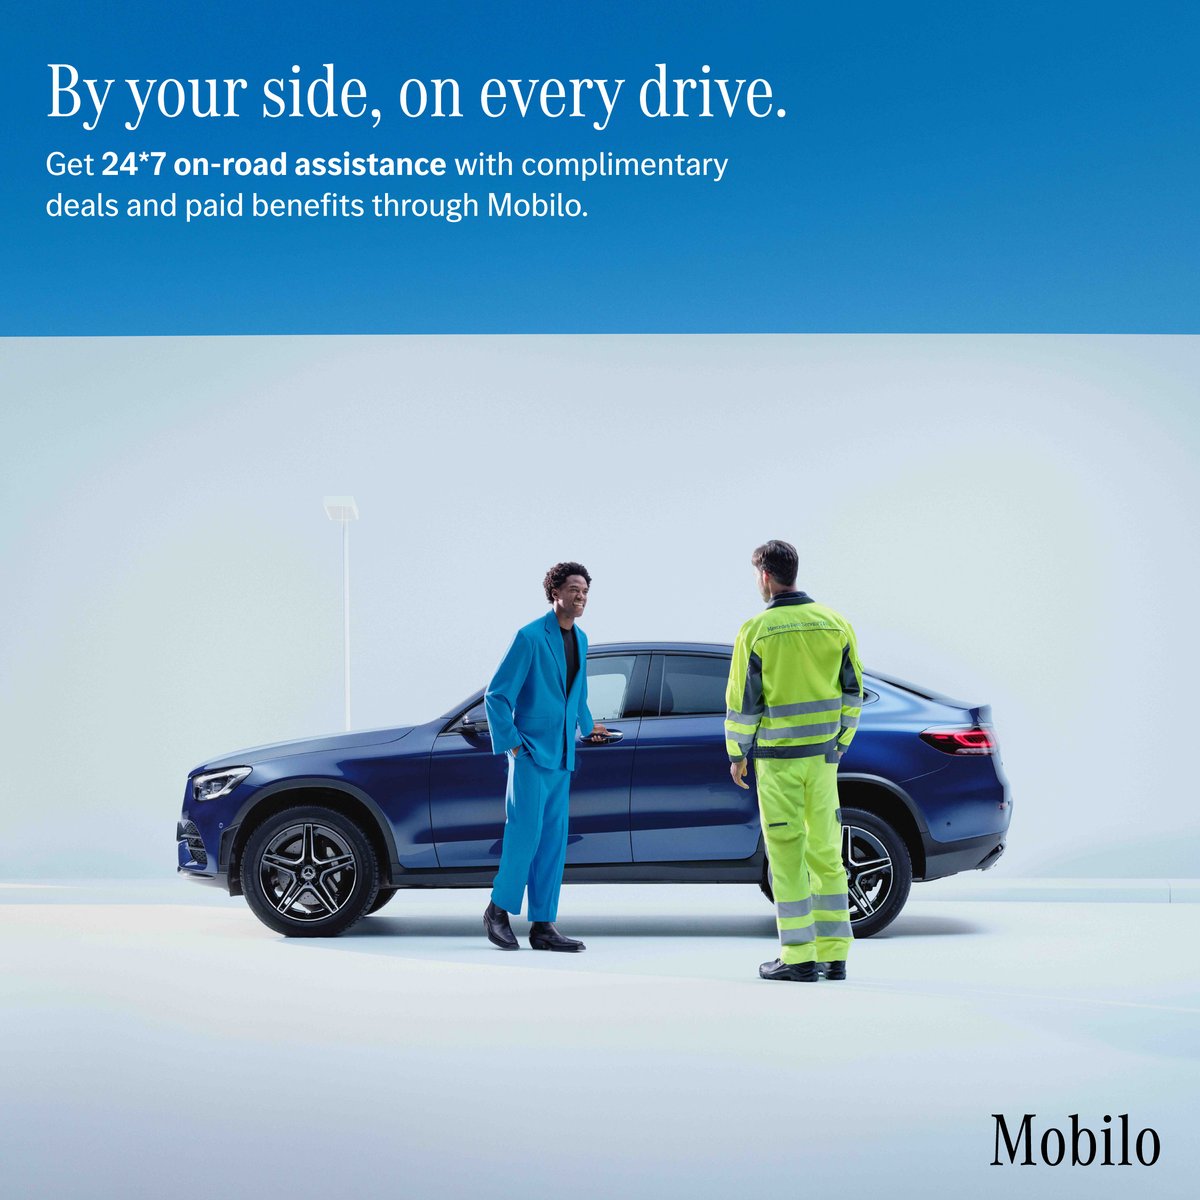 Mobilo: 24/7 on-road aid, free deals, paid perks. No road worries. Drive with confidence

To know more, call Titanium Motors 8190810000.

#Mobilo  #PeaceOfMind #MercedesBenzService #MercedesBenz #TitaniumMotors #VSTGroup #Chennai #MountRoad #OMR #Thoraipakkam #Tamilnadu